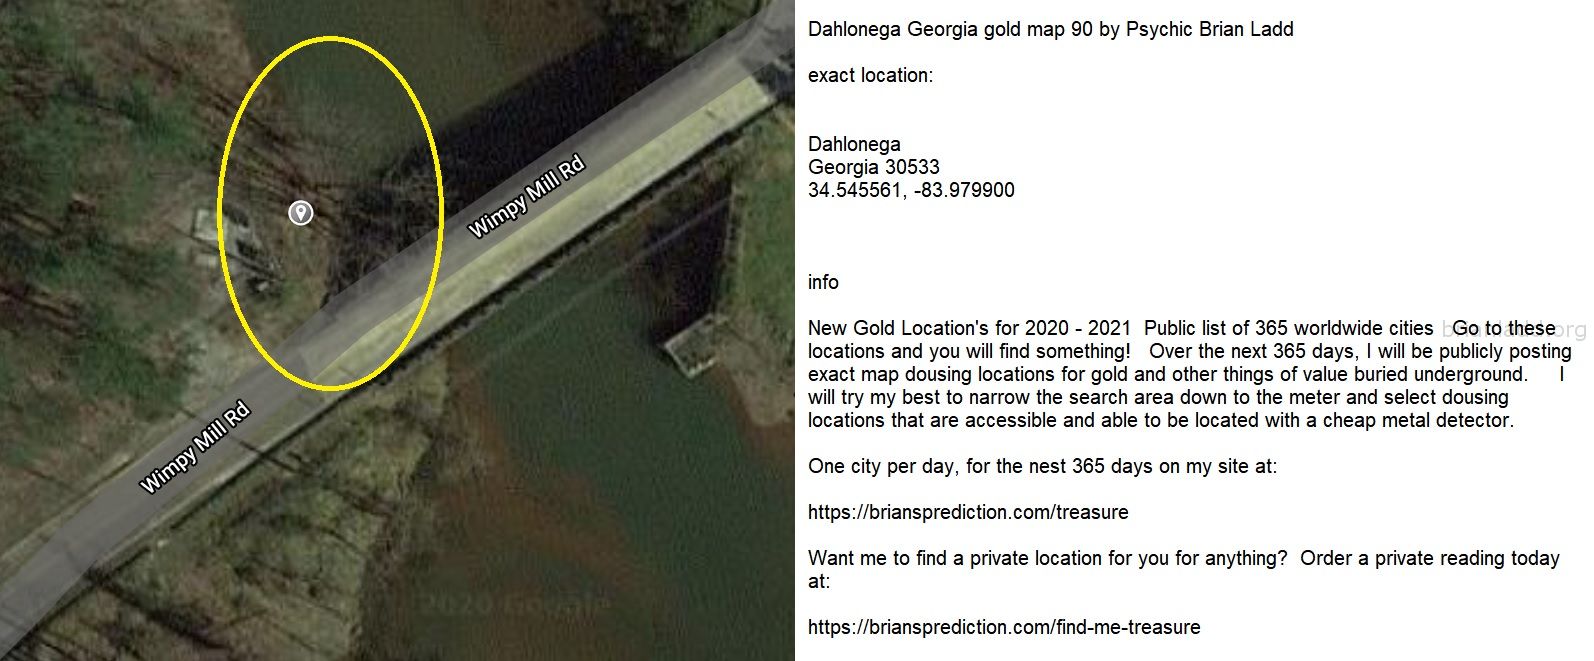 Dahlonega Georgia Gold Map 90 By Psychic Brian Ladd - Dahlonega Georgia Gold Map 90 By Psychic Brian Ladd  Exact Locatio...
Dahlonega Georgia Gold Map 90 By Psychic Brian Ladd  Exact Location:  Dahlonega  Georgia 30533  34.545561, -83.979900  Info  New Gold Location'S For 2020 - 2021  Public List Of 365 Worldwide Cities  Go To These Locations And You Will Find Something!  Over The Next 365 Days, I Will Be Publicly Posting Exact Map Dousing Locations For Gold And Other Things Of Value Buried Underground.  I Will Try My Best To Narrow The Search Area Down To The Meter And Select Dousing Locations That Are Accessible And Able To Be Located With A Cheap Metal Detector.  One City Per Day, For The Nest 365 Days On My Site At:   https://briansprediction.com/Treasure  Want Me To Find A Private Location For You For Anything?  Order A Private Reading Today At:   https://briansprediction.com/Find-Me-Treasure
